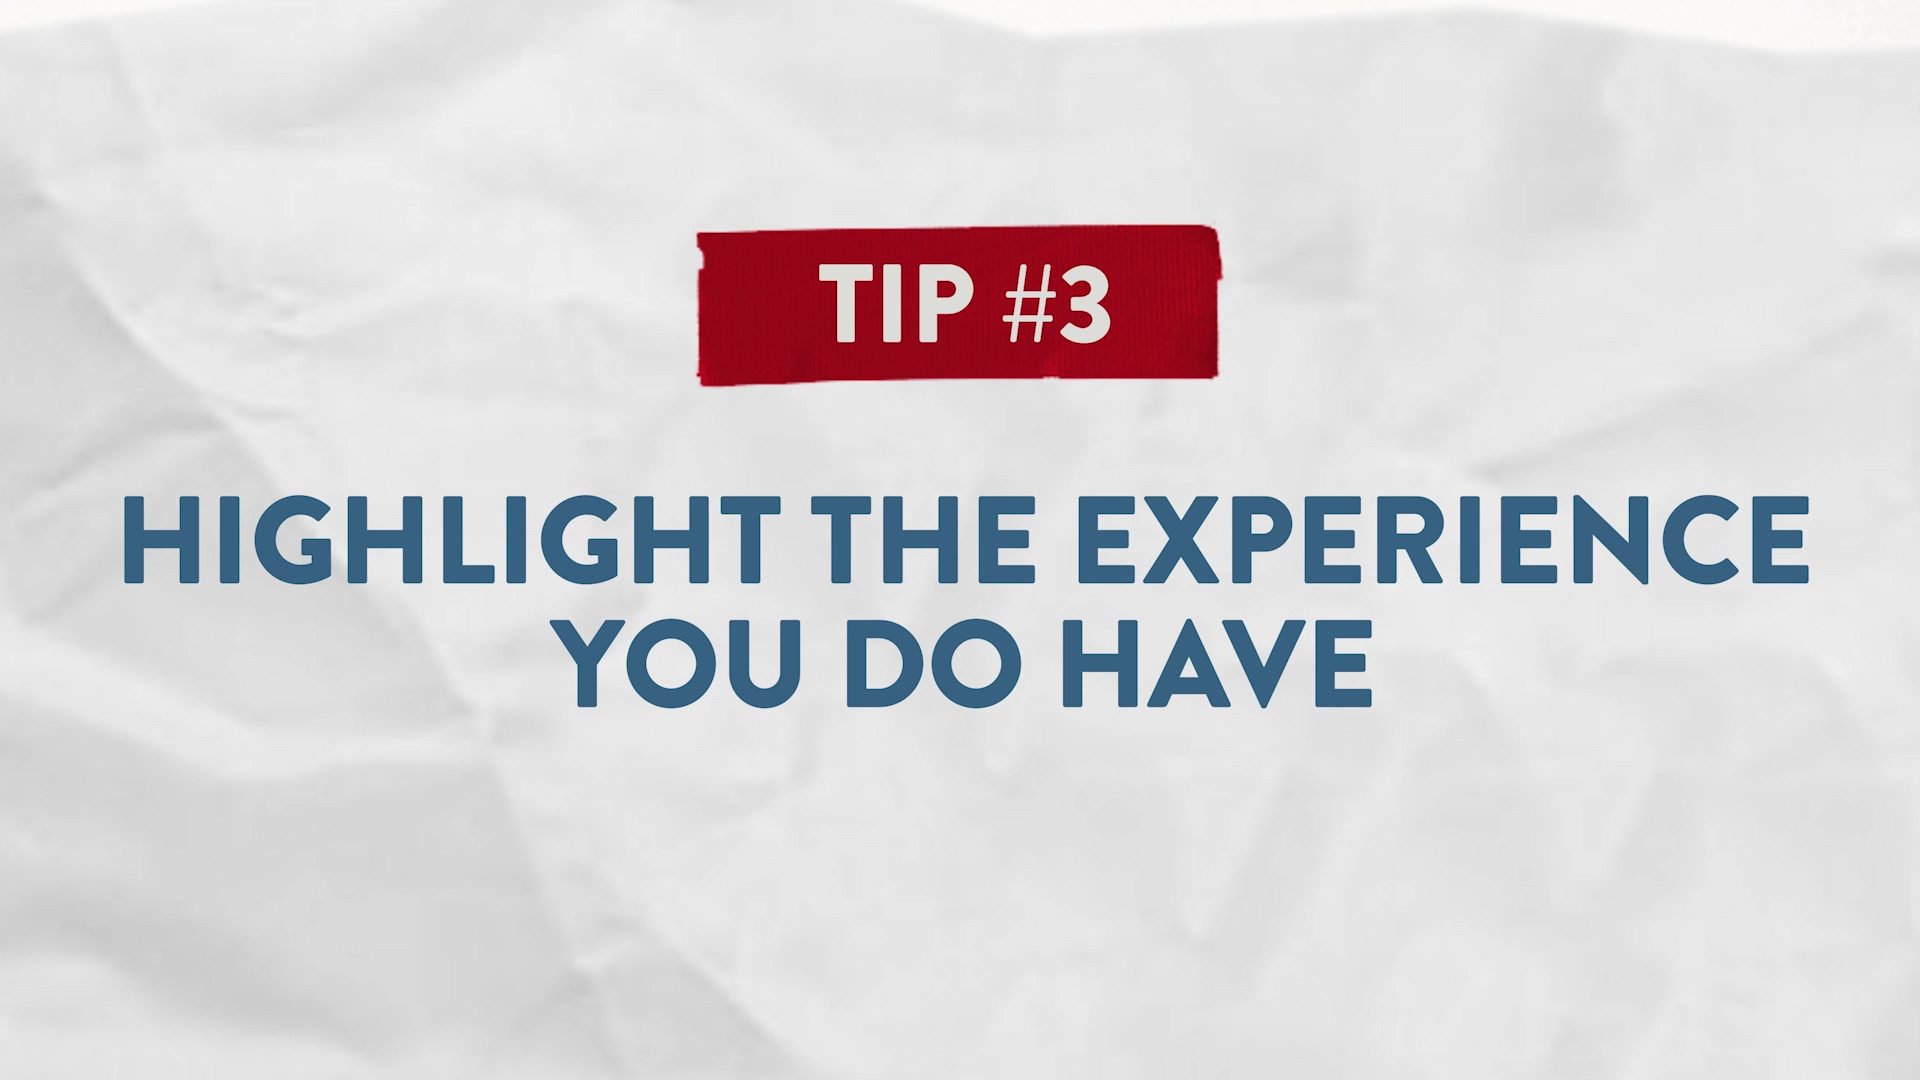 Tip #3 Highlight the Experience You Do Have